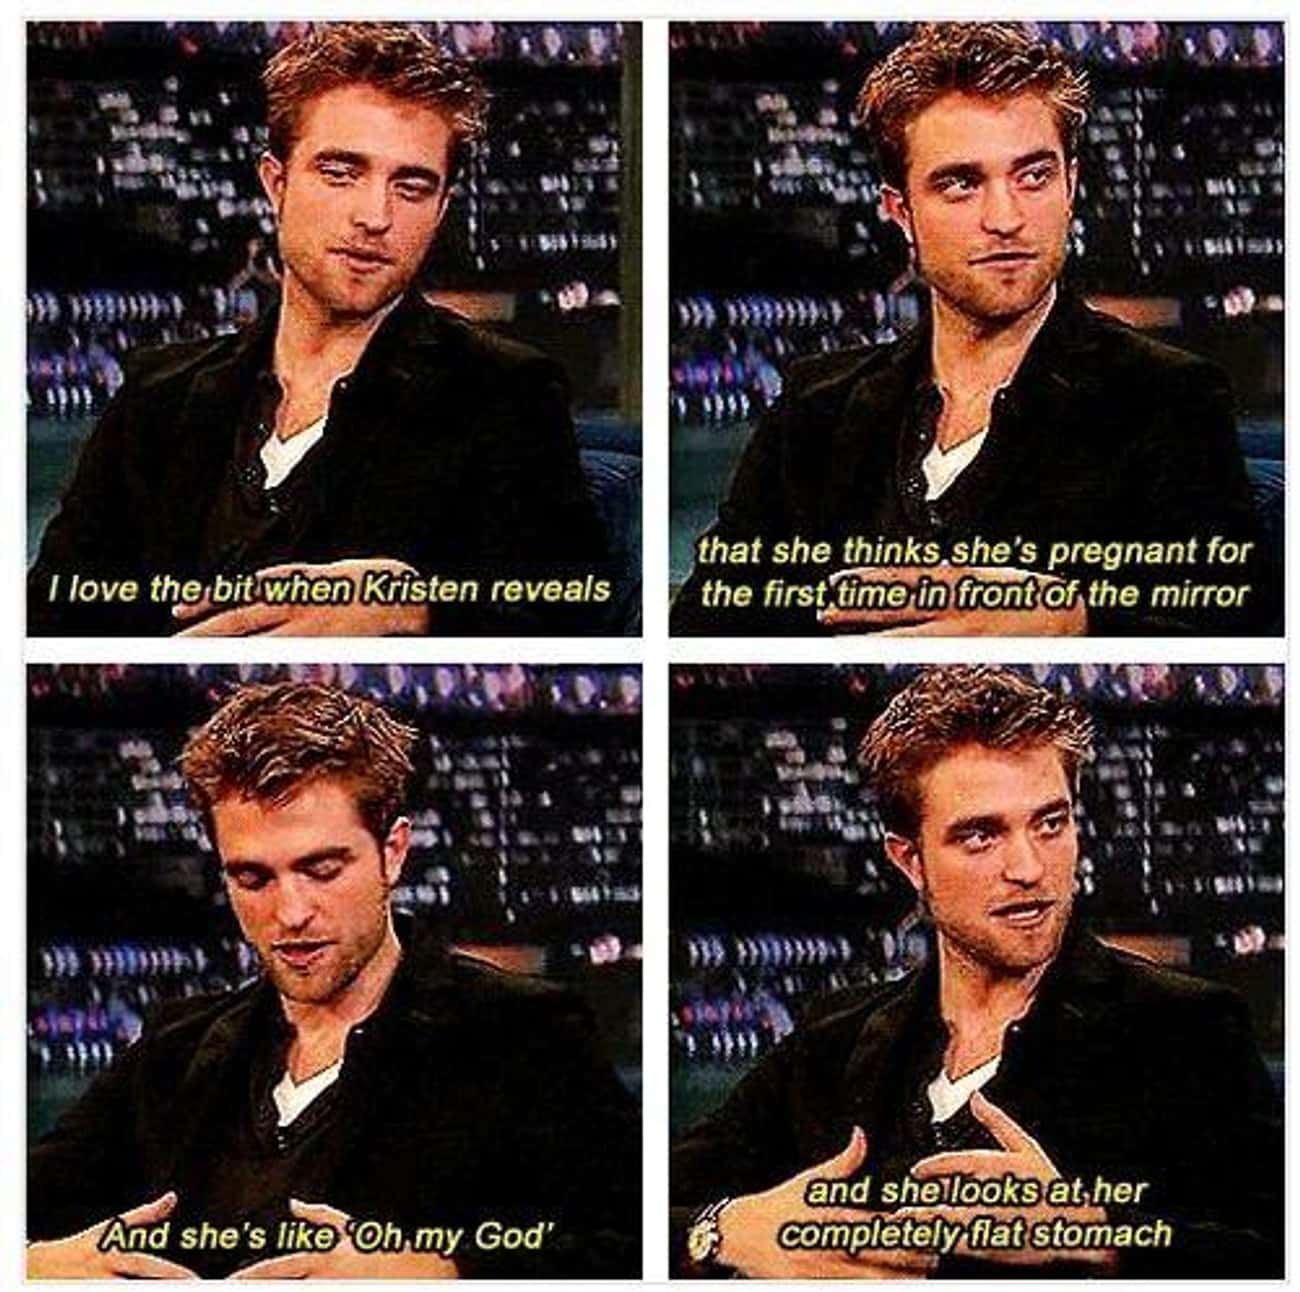 No one hates Twilight more than Robert Pattinson does